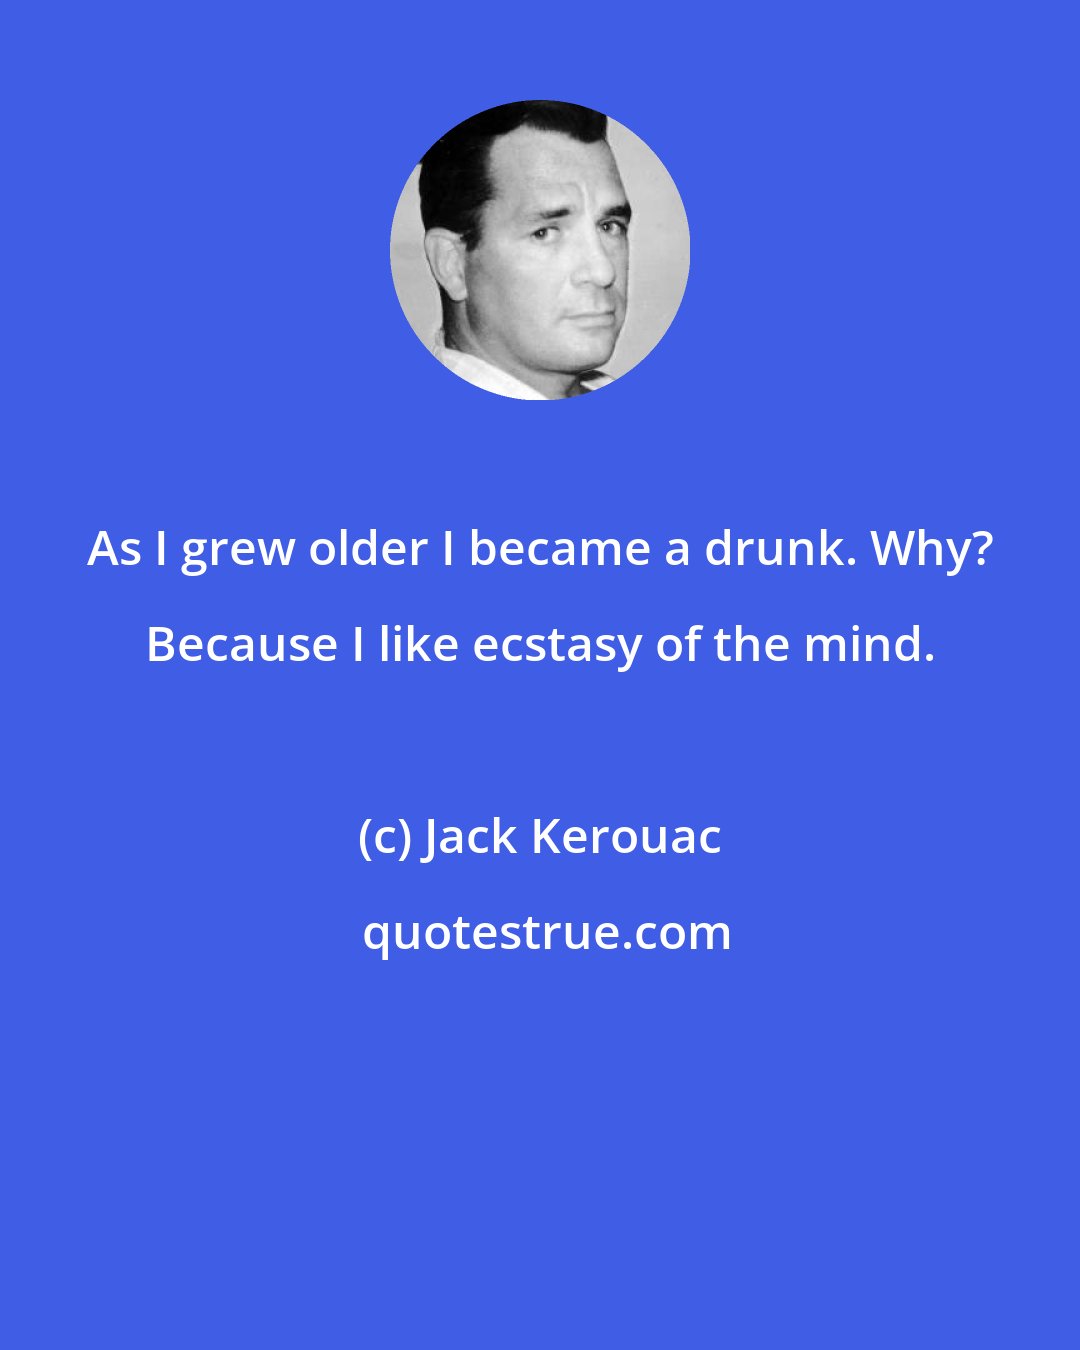 Jack Kerouac: As I grew older I became a drunk. Why? Because I like ecstasy of the mind.